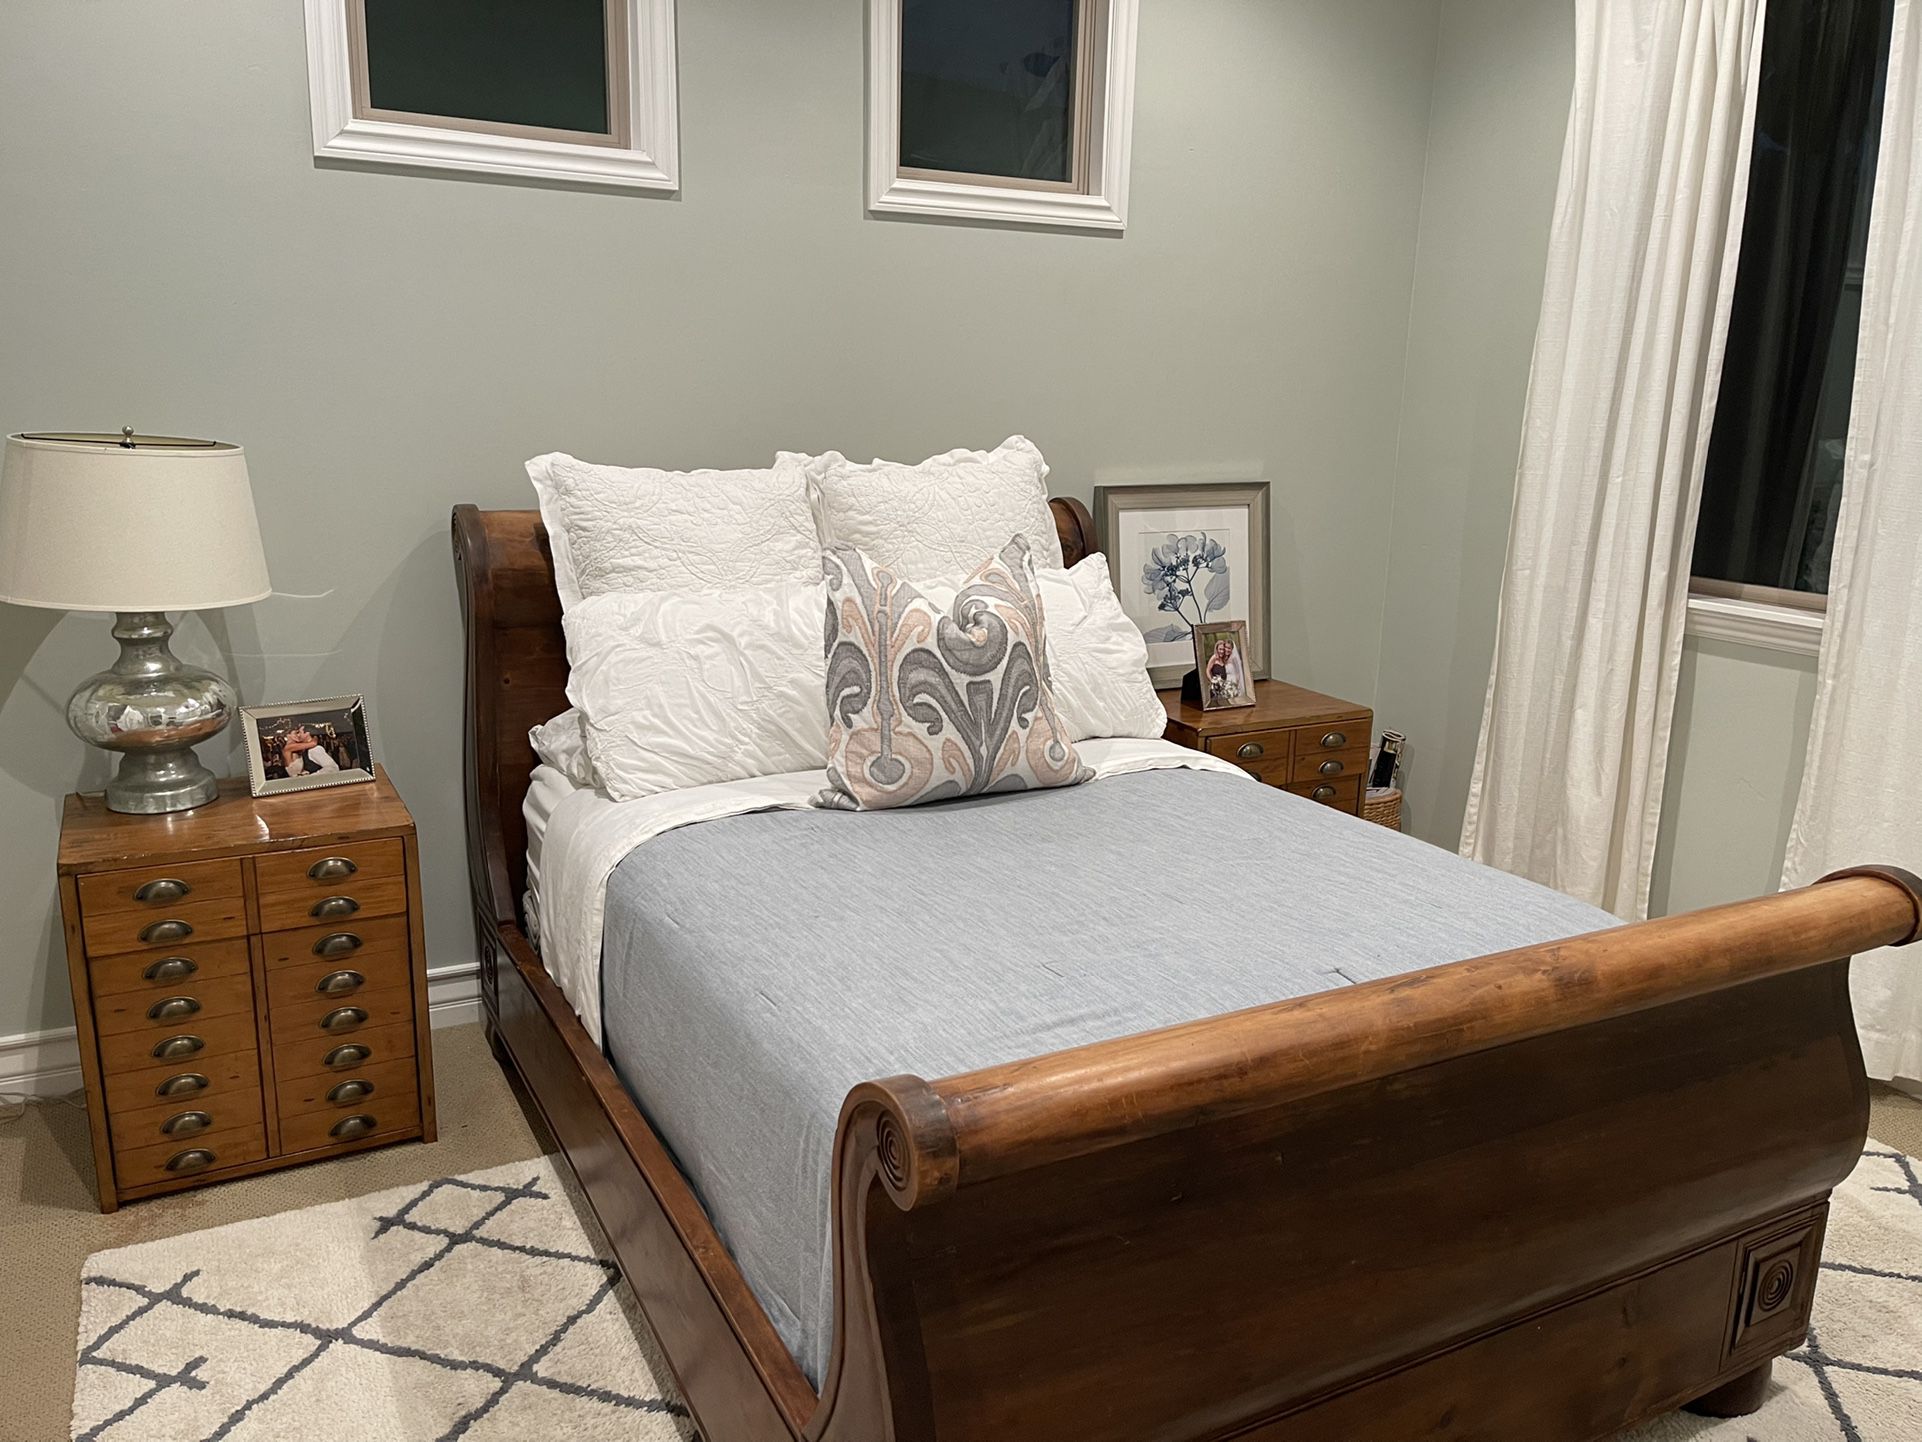 Queen Bed & Two Side Tables